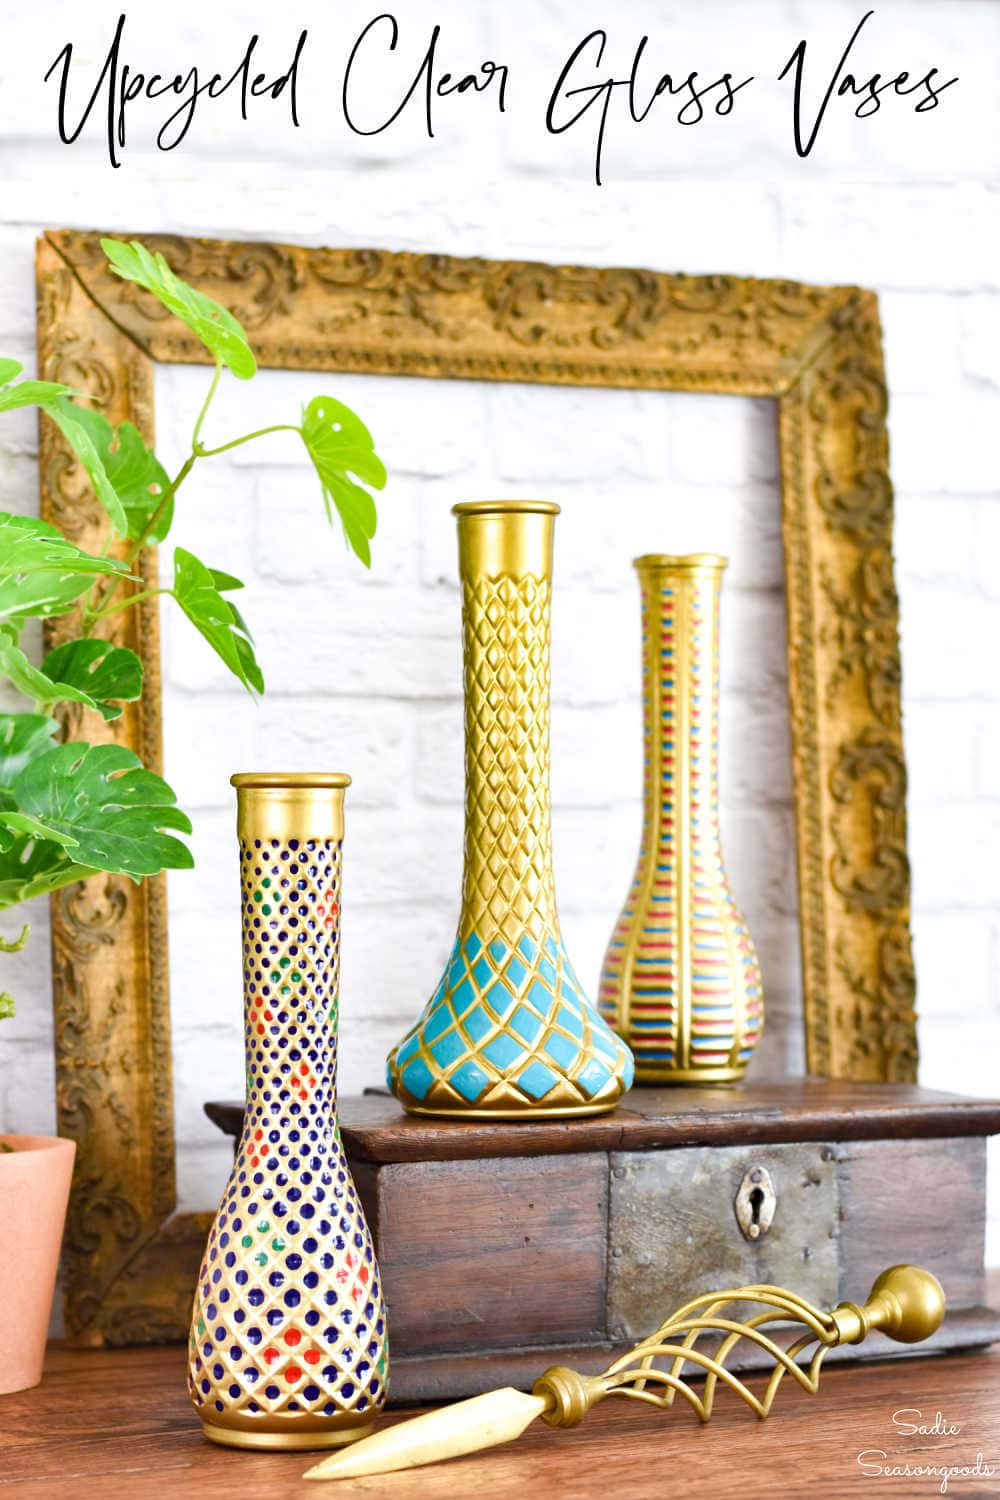 cloisonne vases that started out as clear glass vases from the thrift store